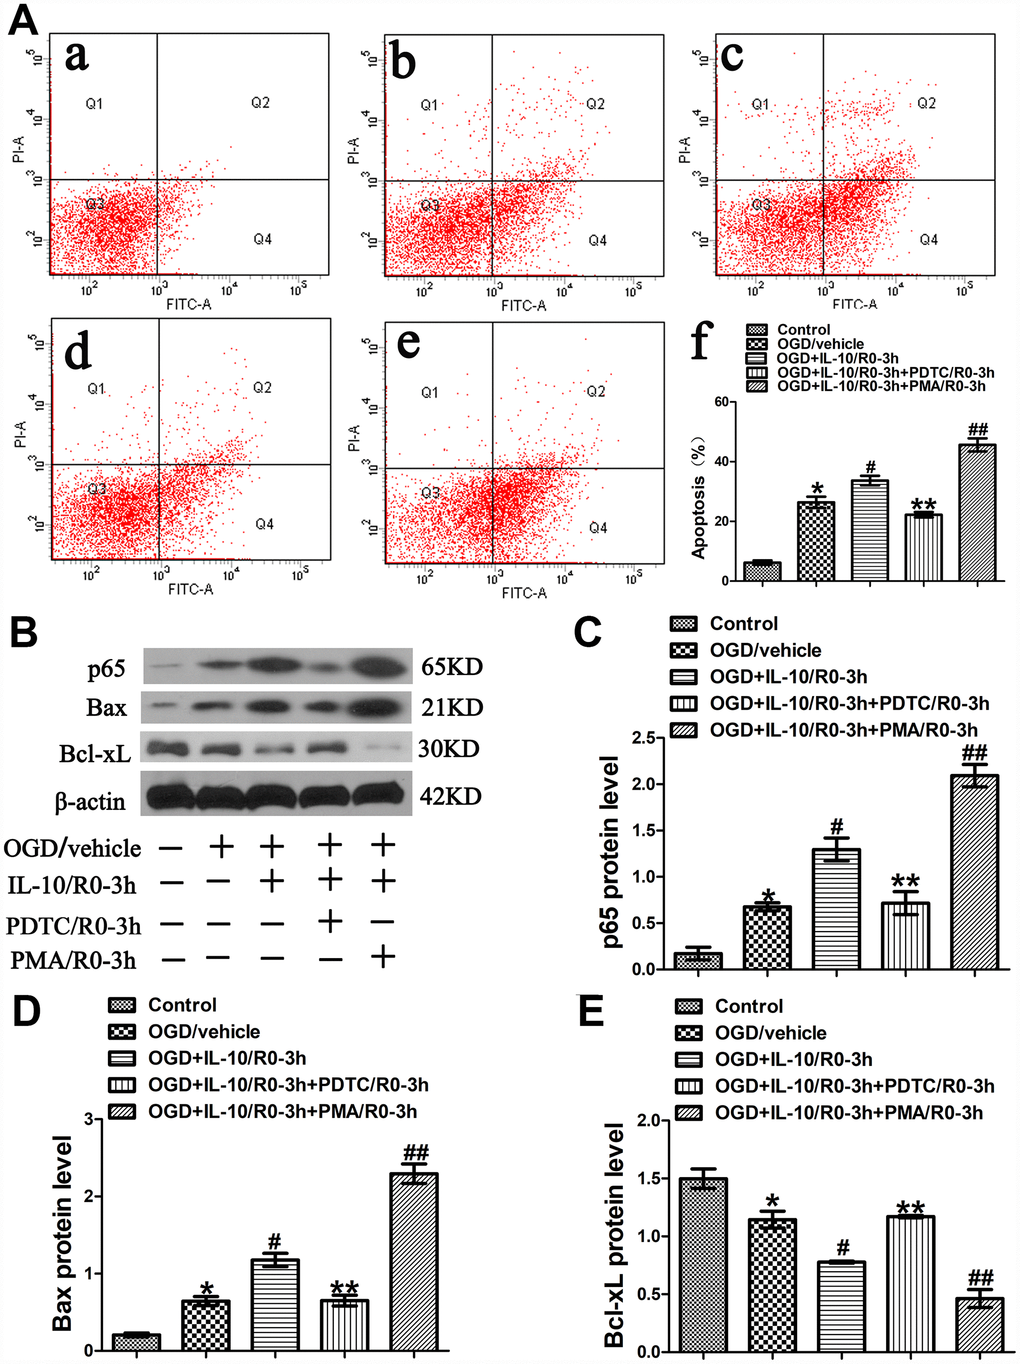 OGD-induced apoptosis increased by IL-10 via p65 at an early stage after OGD injury. (A) Forty-eight hours after OGD, apoptosis of neurons was detected by flow cytometry. The signals from apoptotic neurons were localized in the Q2 and Q4 quadrants of the resulting dot-plot graph. (a) Control group; (b) OGD group; (c) OGD+IL-10/R0-3h group; (d) OGD+IL-10/R0-3h+PDTC/R0-3h; (e) OGD+IL-10/R0-3h+PMA/R0-3h group; (f) Statistical graph of apoptosis in different groups (n=3). *p#pp##ppB) The representative image of western blot analysis for p65, Bax and Bcl-xL expression. (C) Western blot analysis of p65 (n=3). *p#pp##ppD) Western blot analysis of Bax (n=3). *p#pp##ppE) Western blot analysis of Bcl-xL (n=3). *p#pp##pp